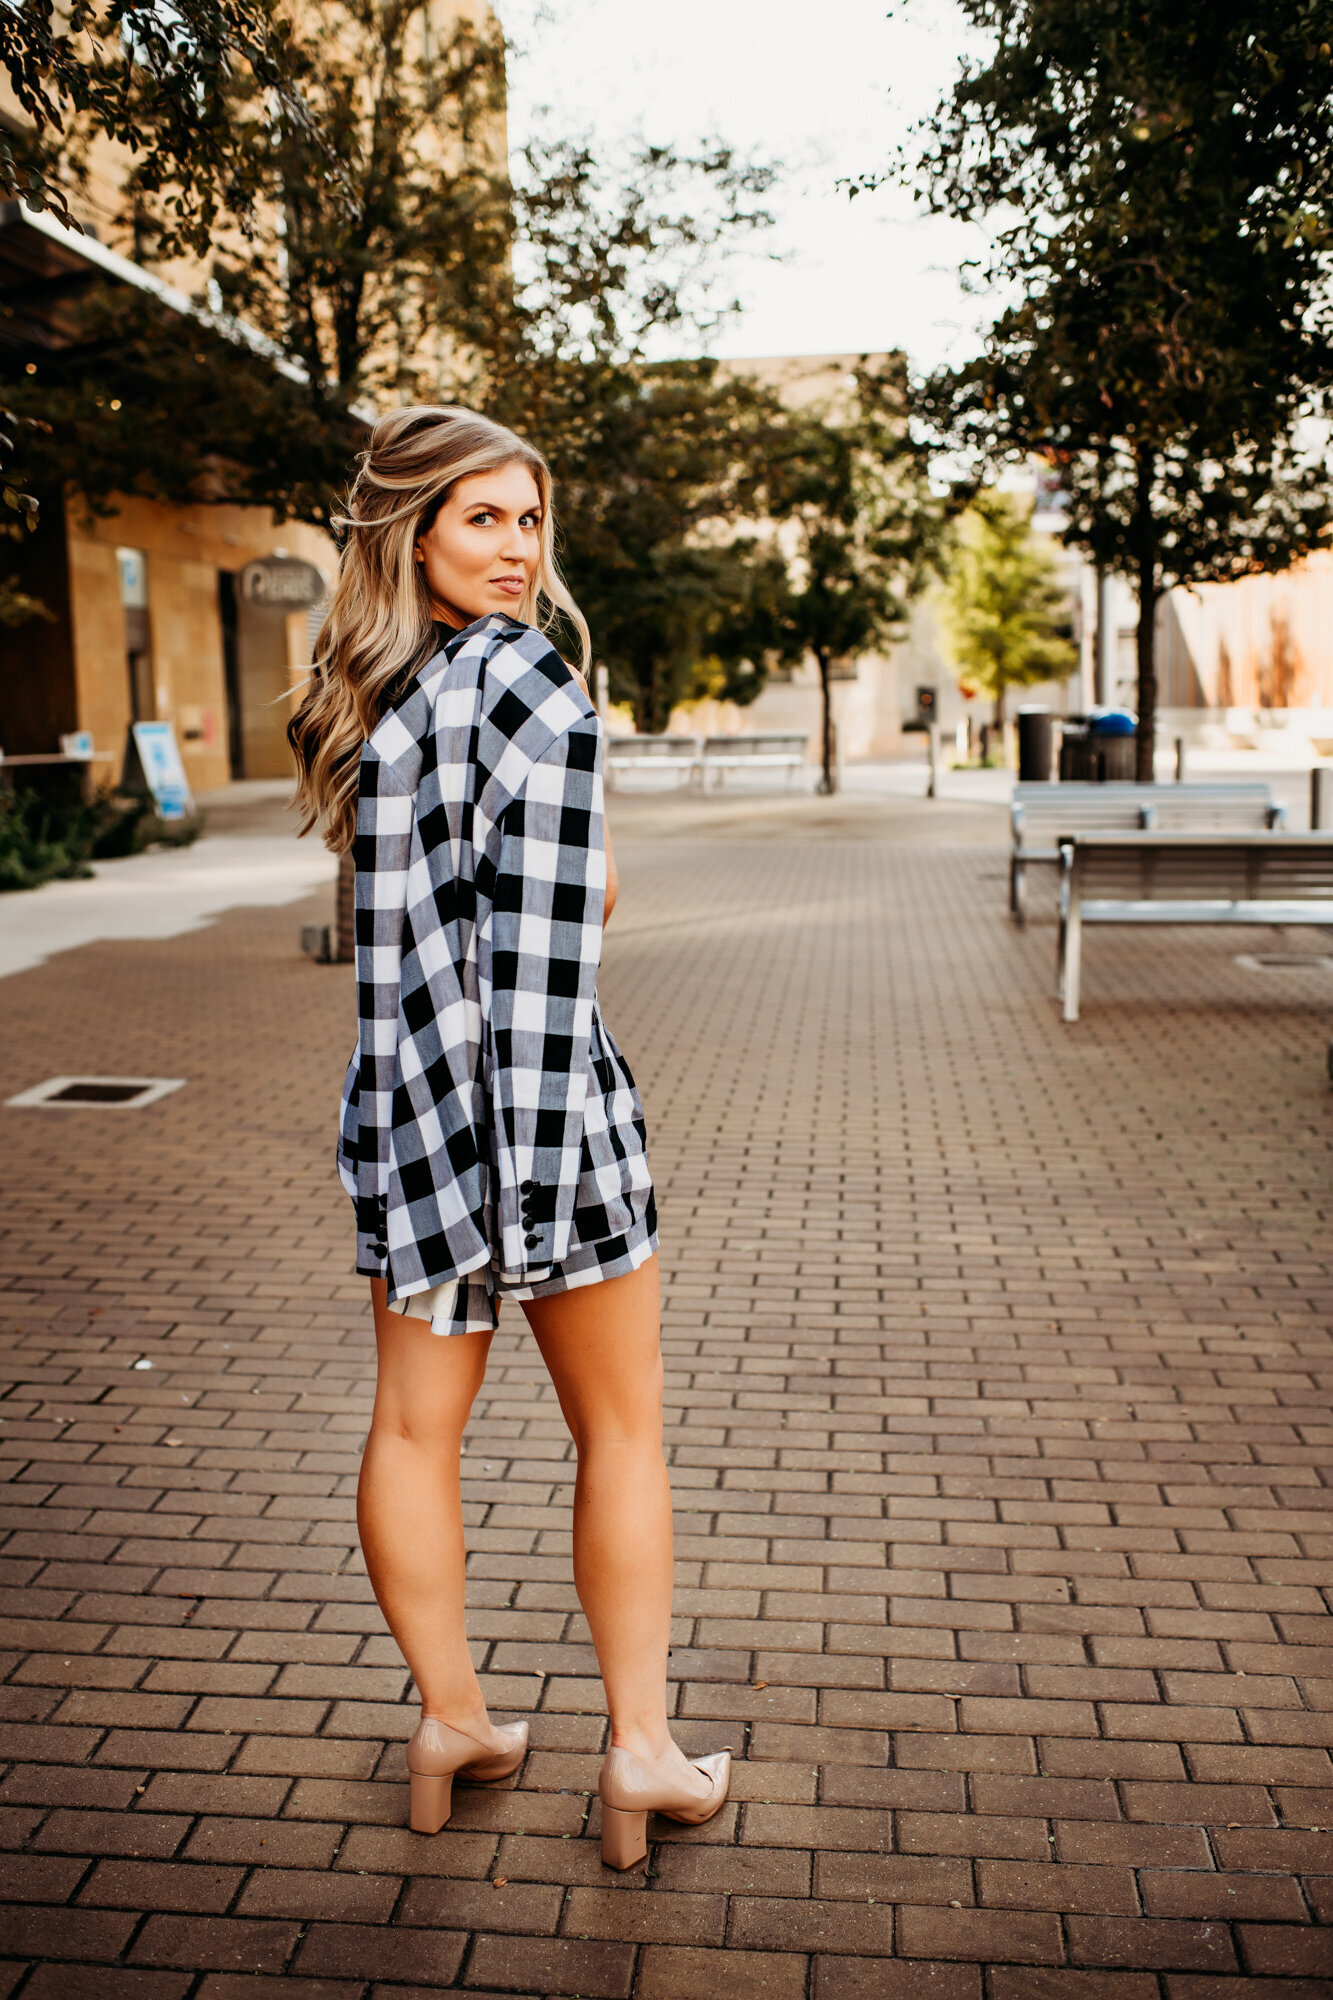 Branding Photographer, a woman wears a large flannel shirt and heels as she stands in town